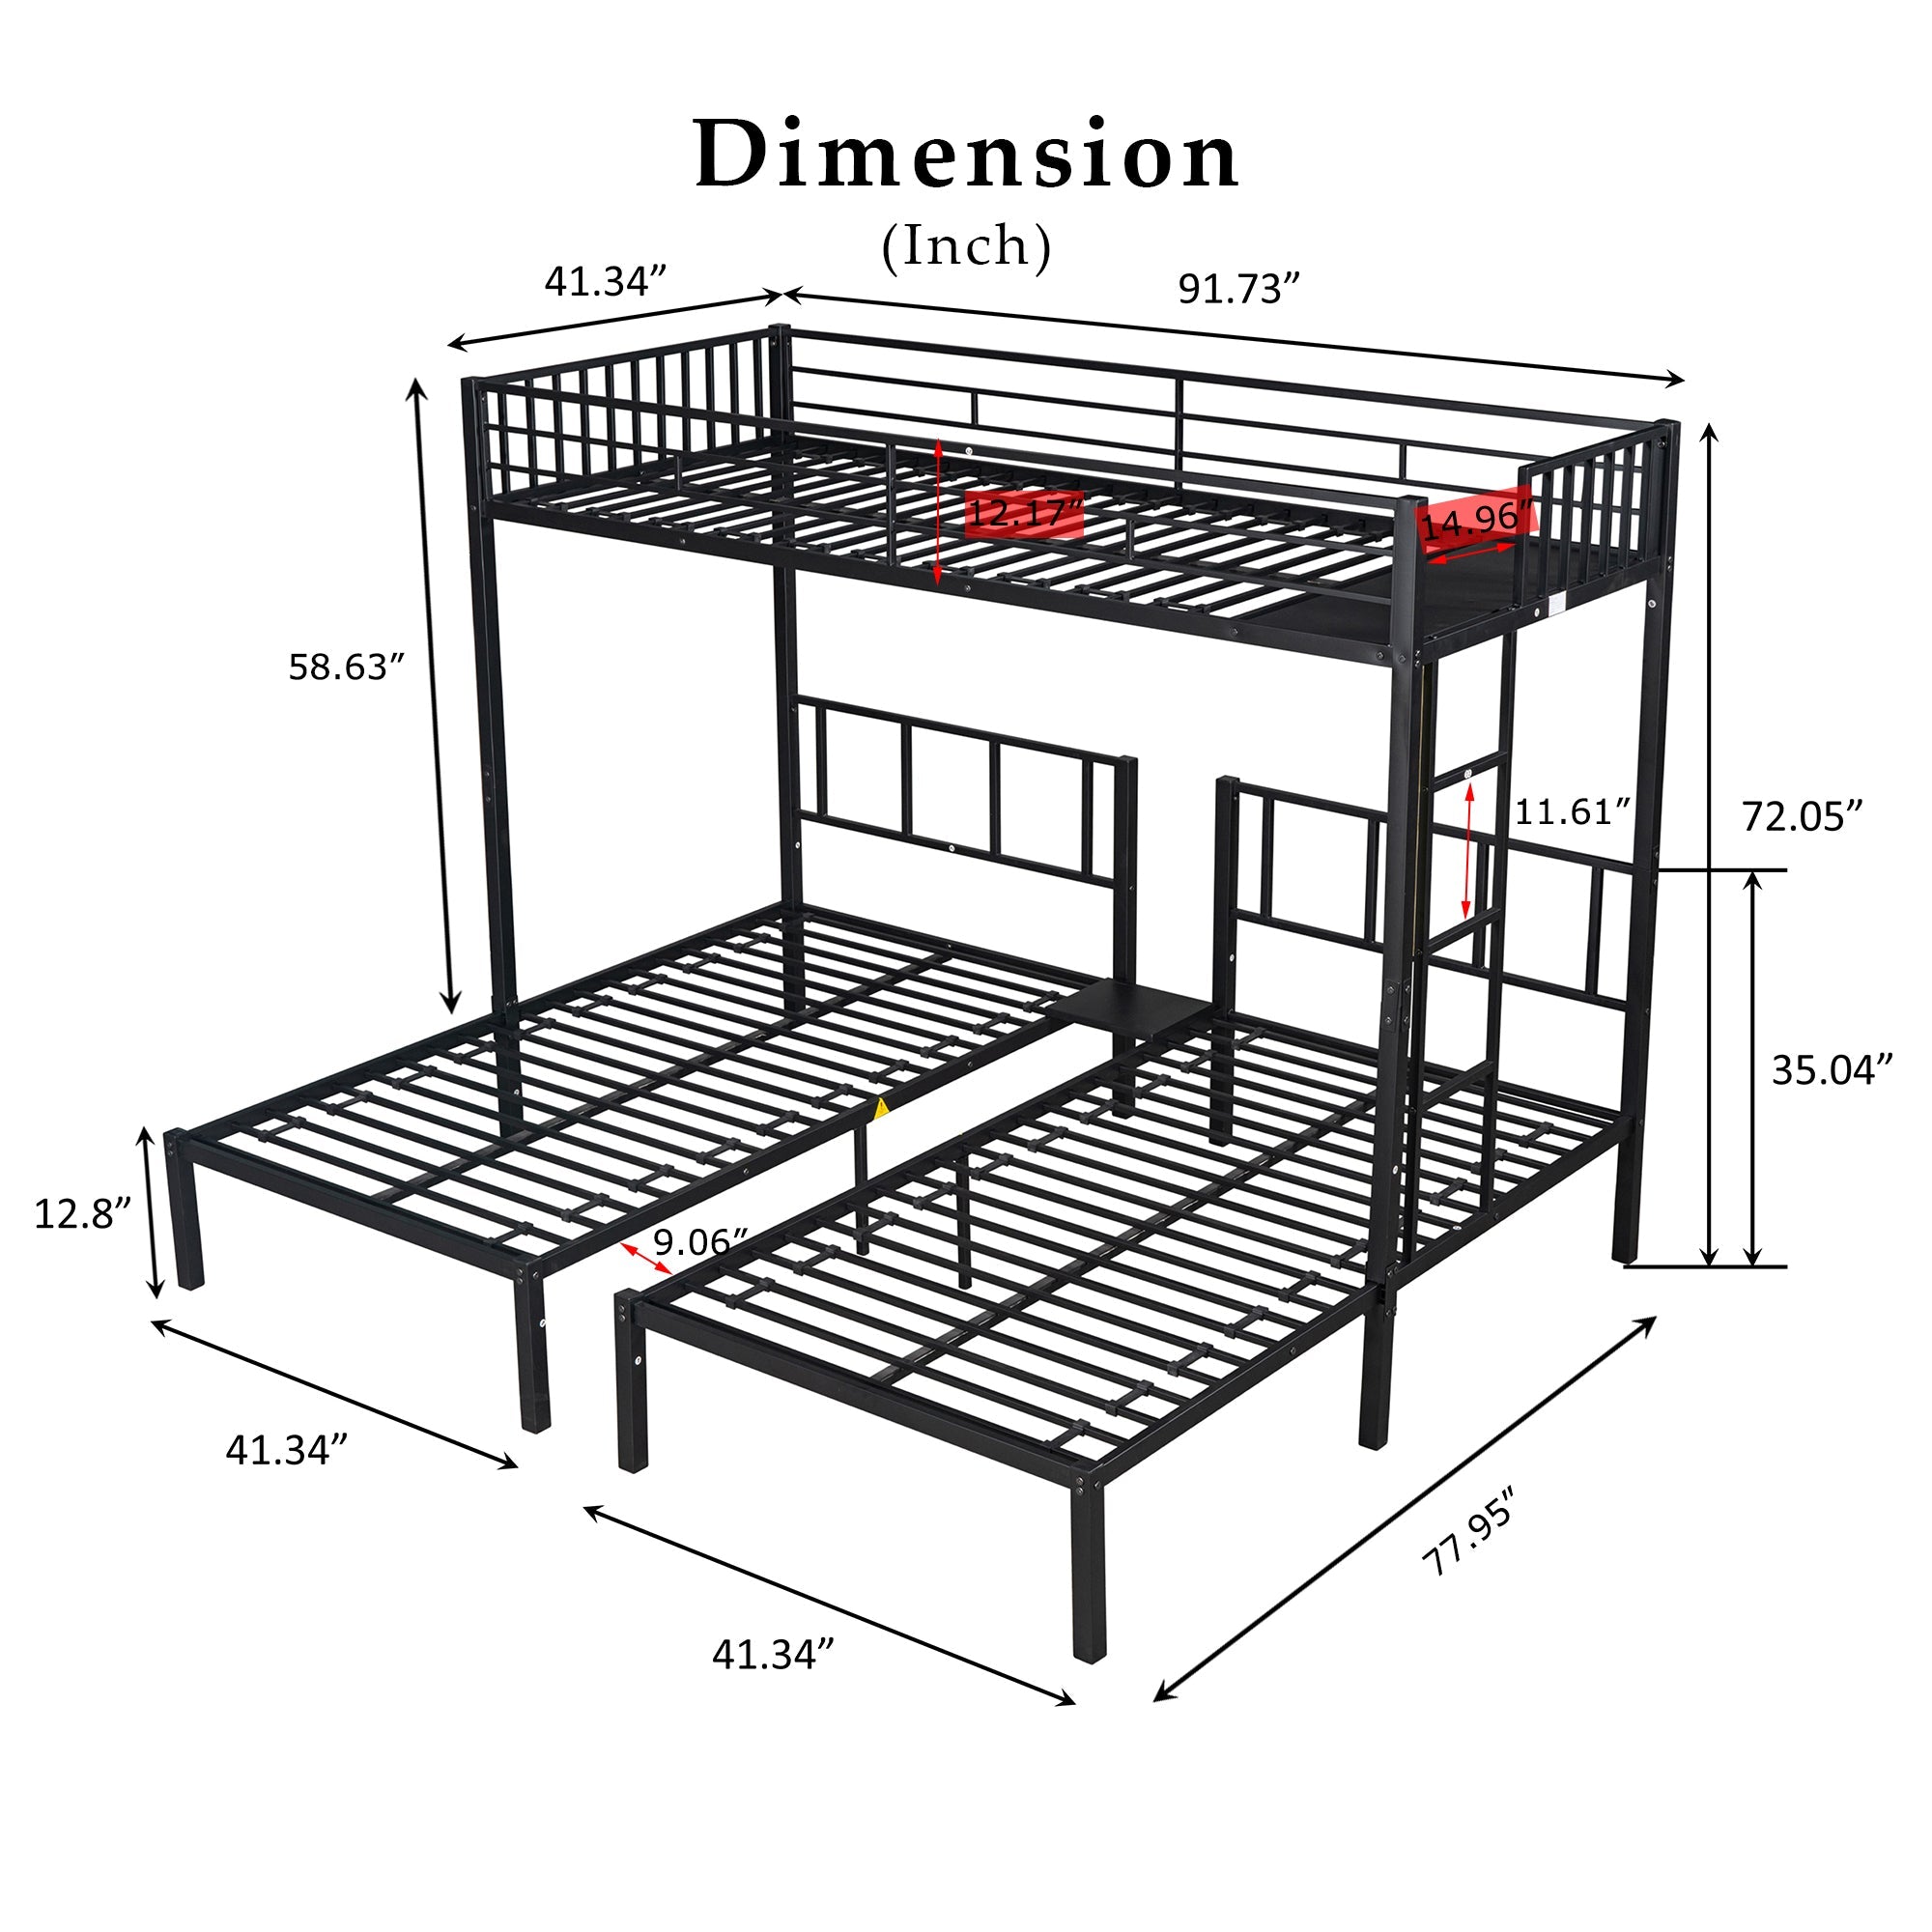 Metal Twin Triple Bunk Bed, Twin over Twin over Twin Bunk Bed for 3 Kids, Noise Reduced Structure, Separates Into 3 Twin Beds, Black